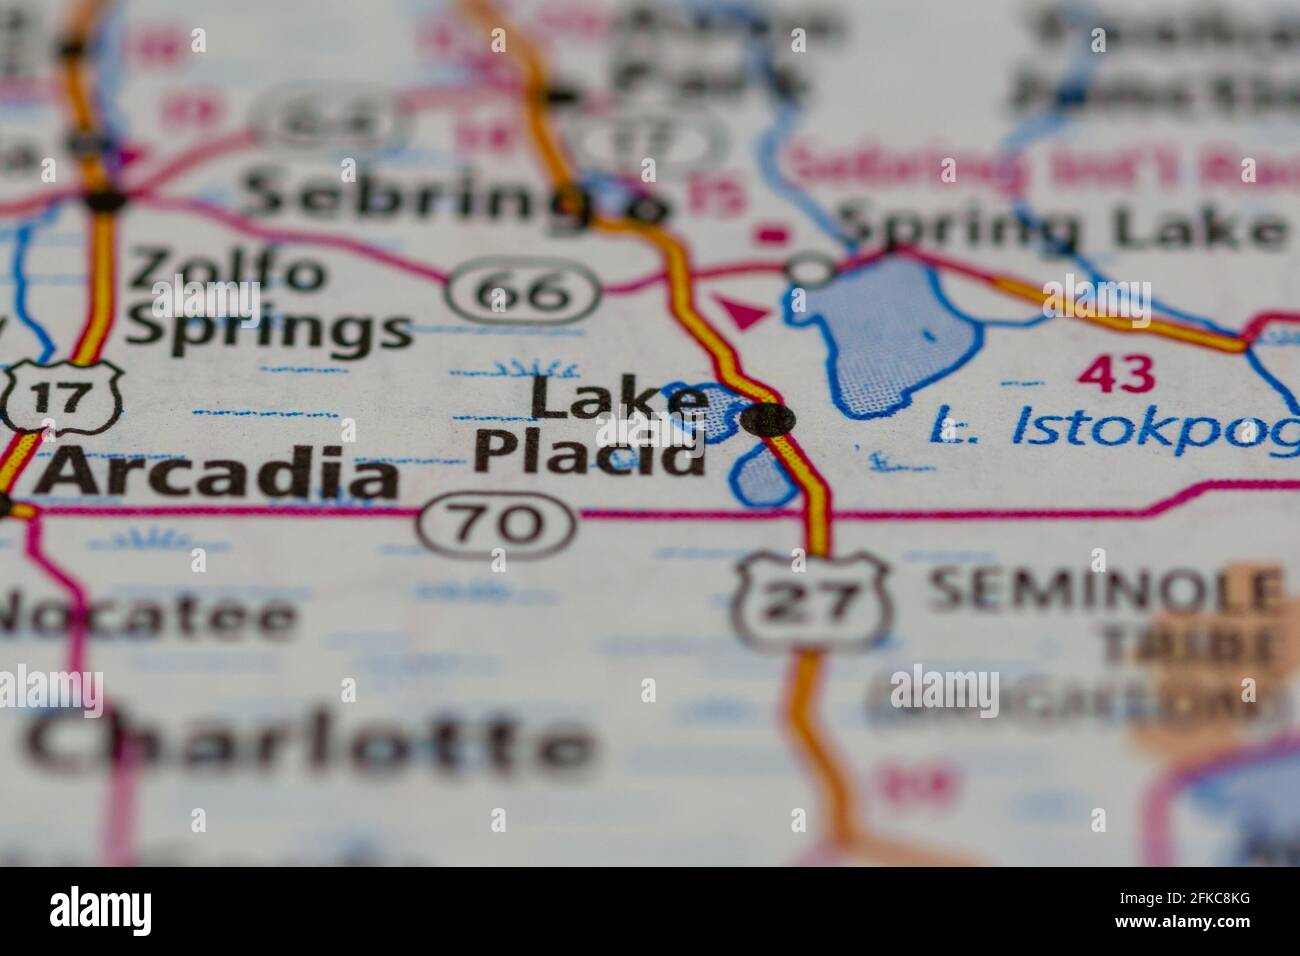 Lake Placid Florida USA Shown on a geography map or road map Stock Photo